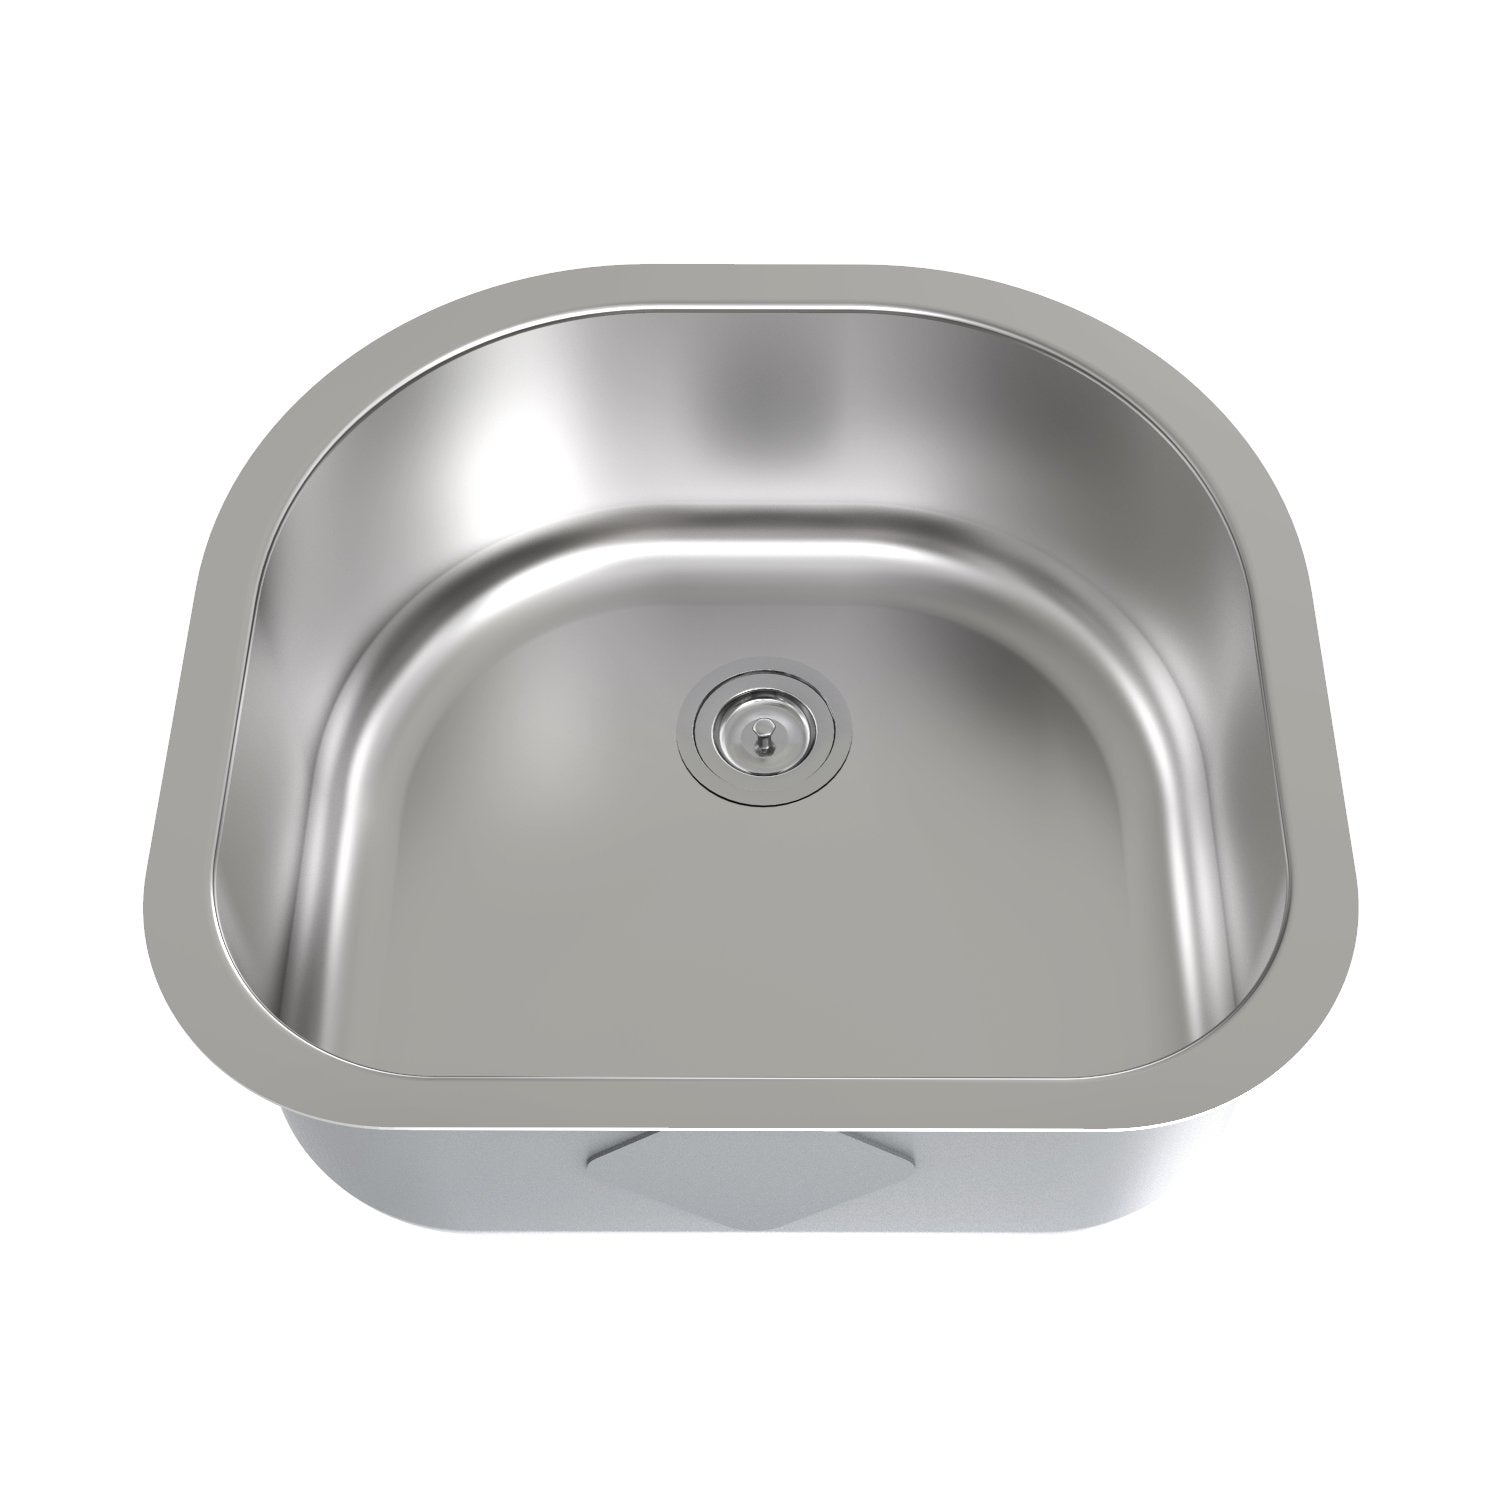 DAX Single Bowl Undermount Kitchen Sink, 18 Gauge Stainless Steel, Brushed Finish, 23 x 21 x 9 Inches (KA-2321)